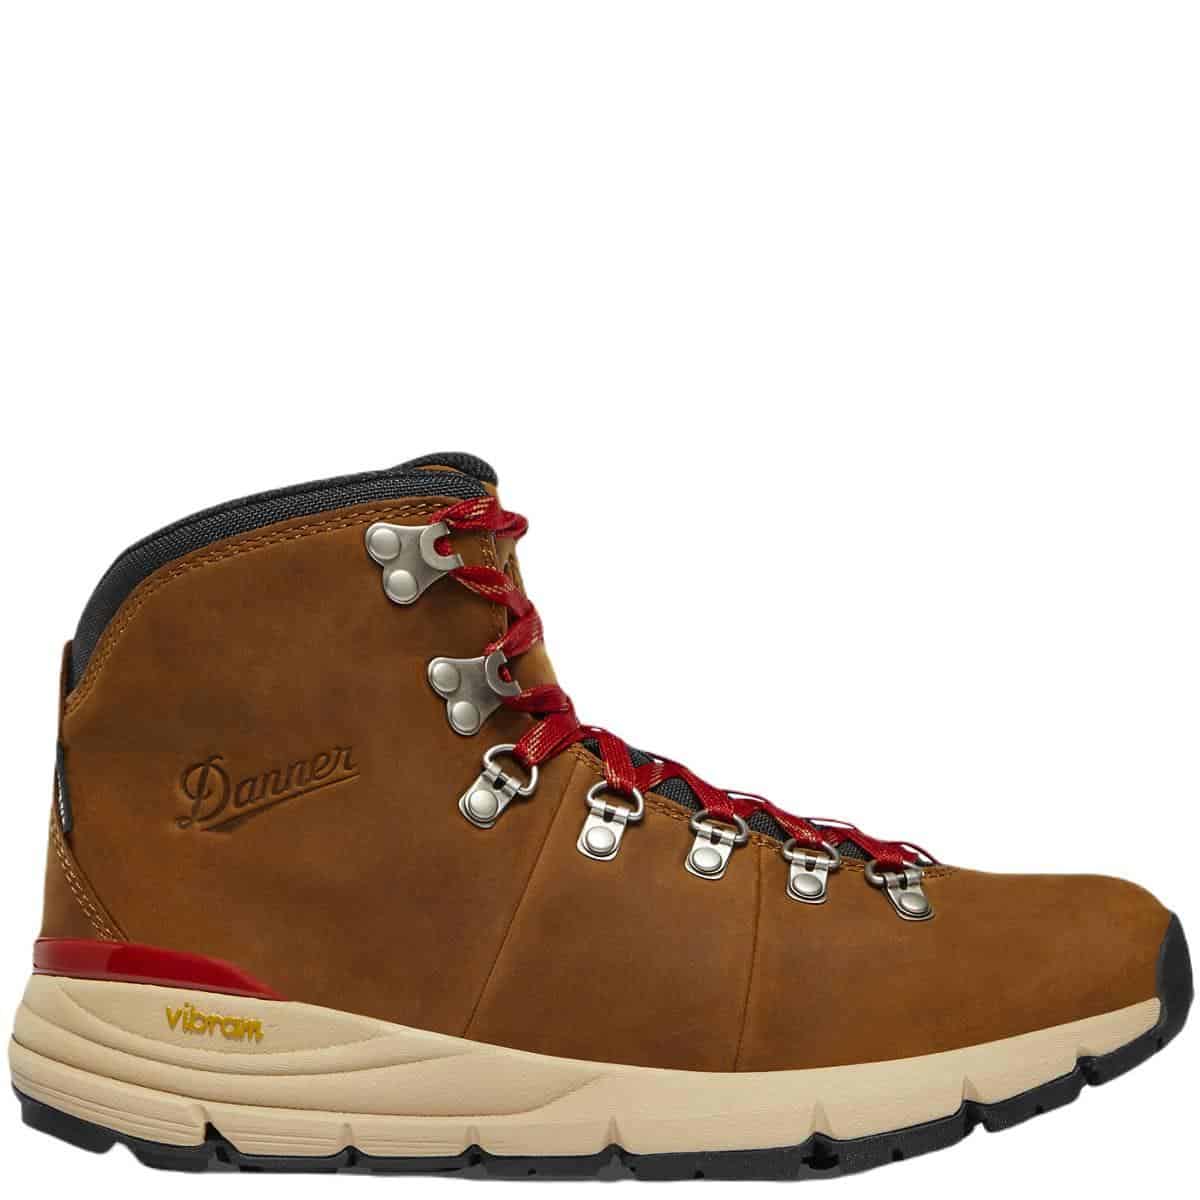 Best hiking boots for Day Hikes Danner Mountain 600 Leaf GT